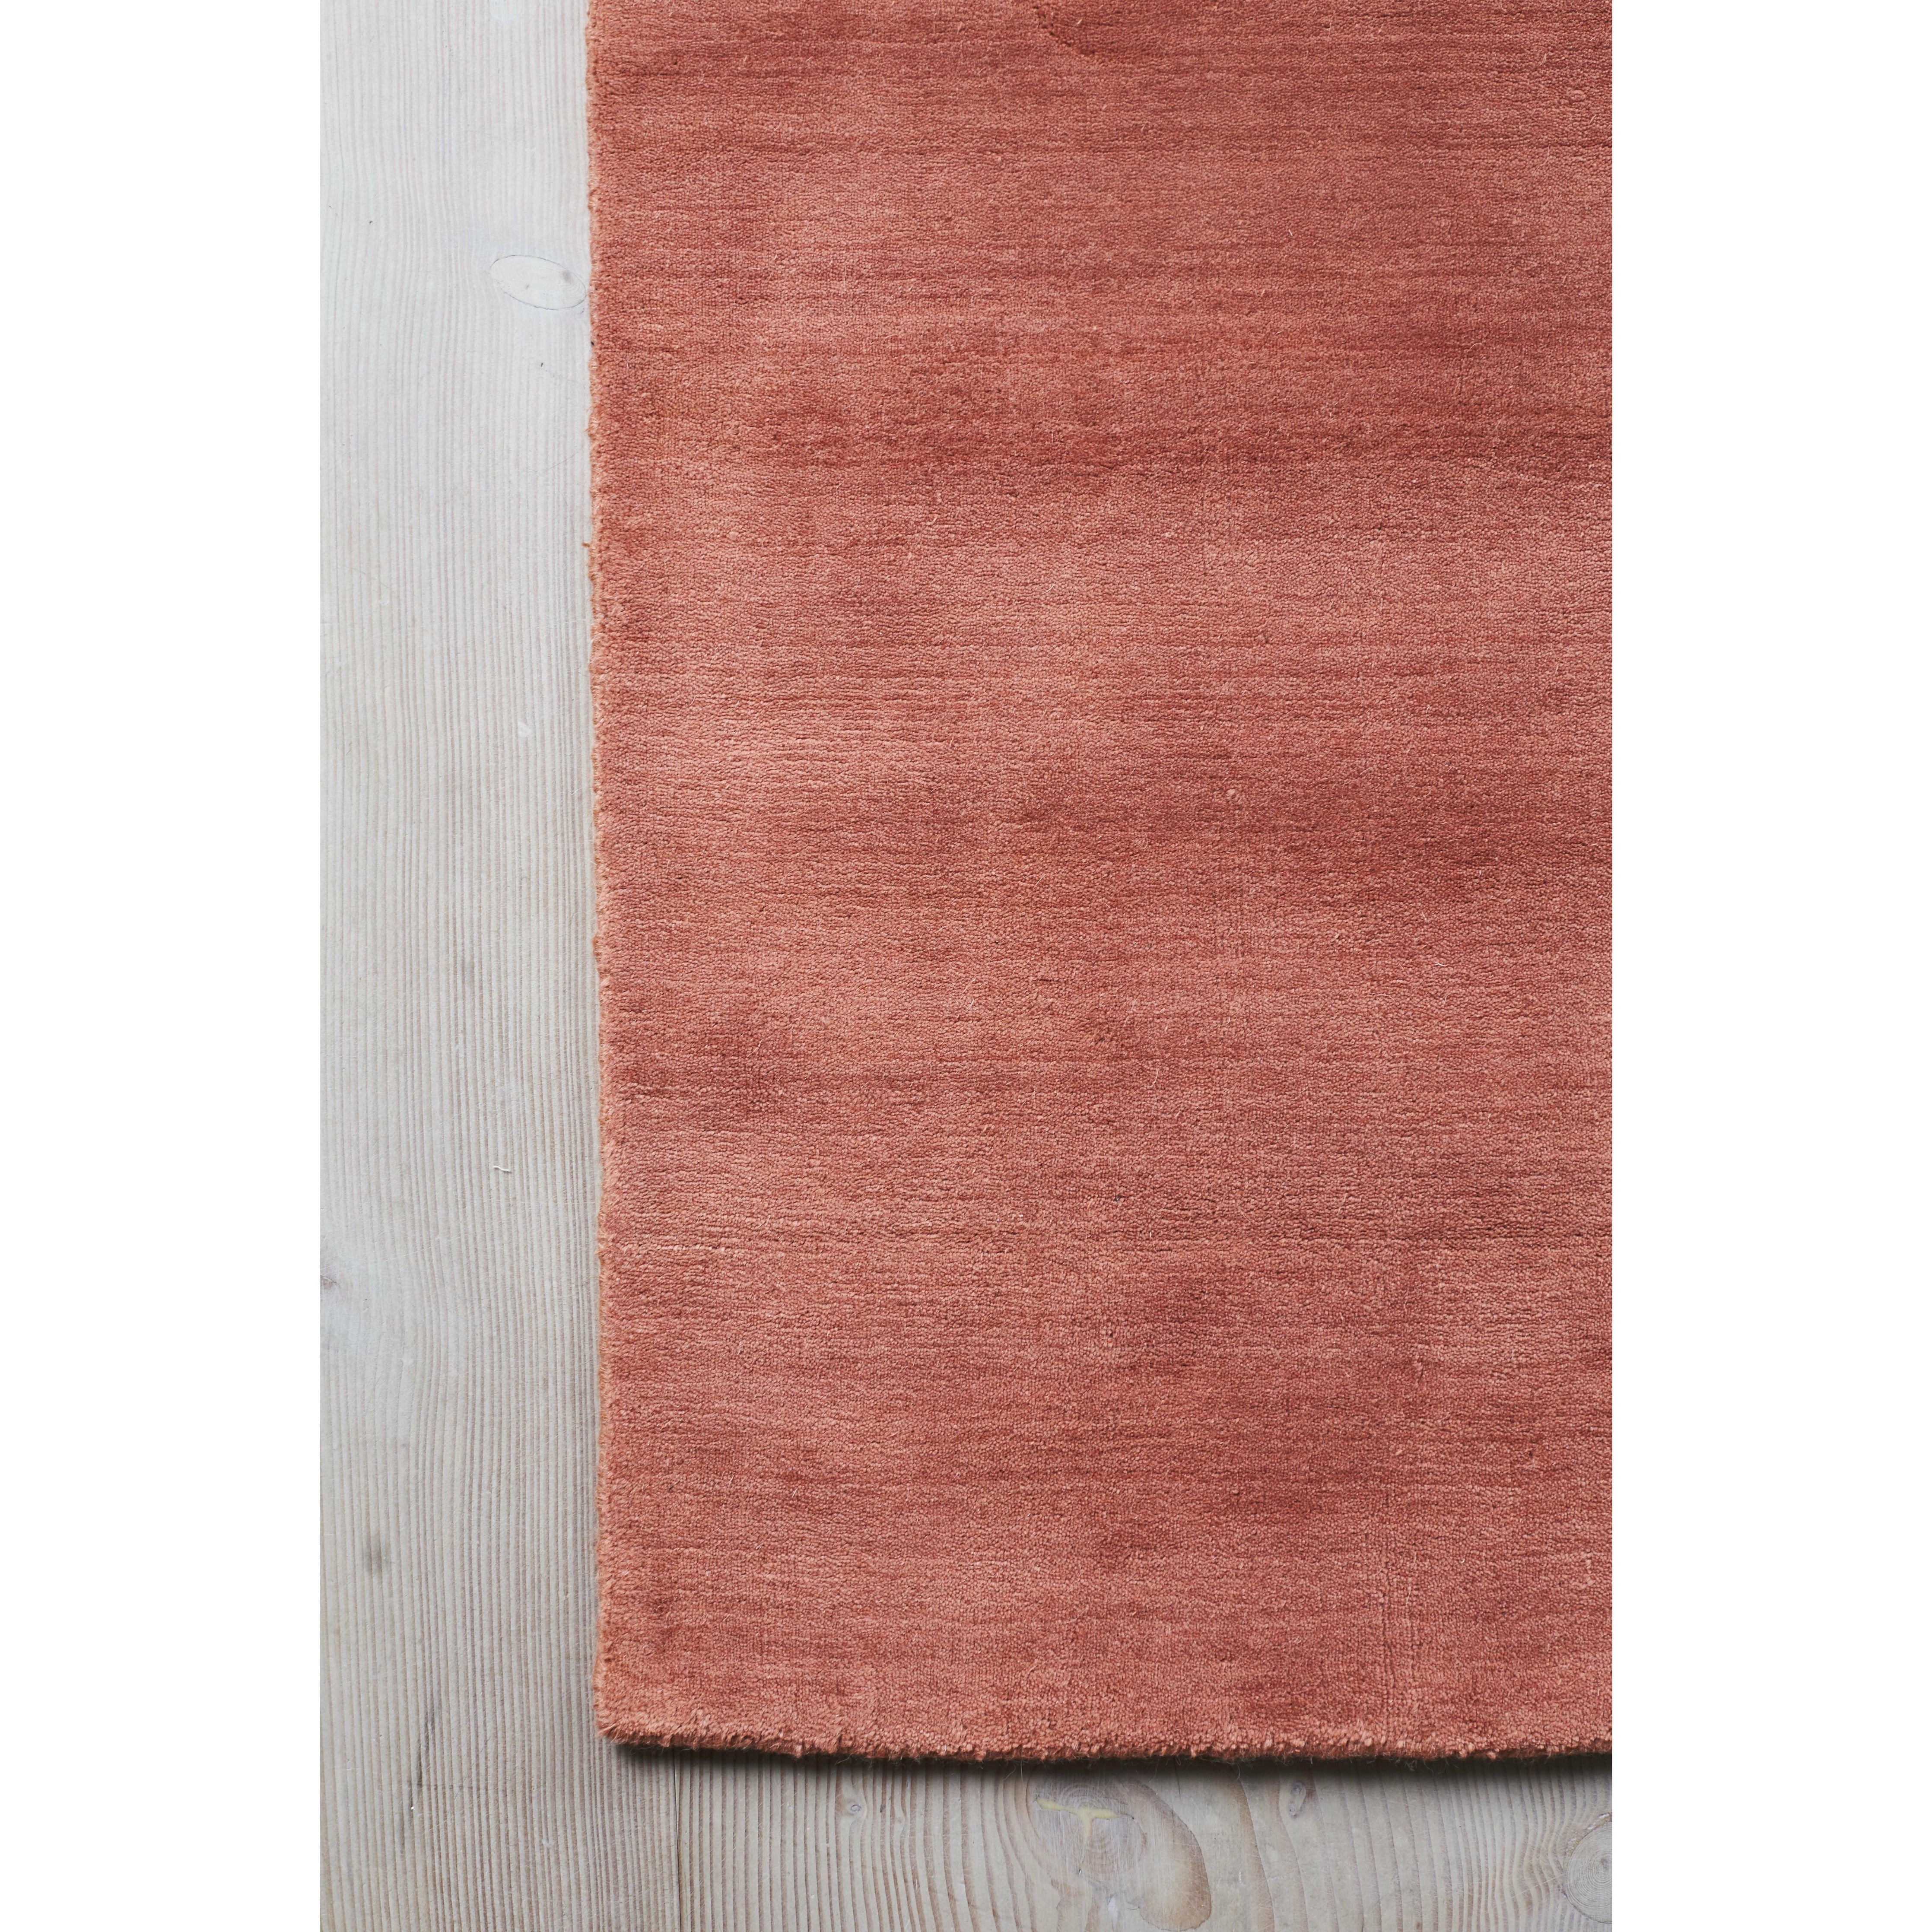 Massimo Earth Tapis Bambou Terre Cuite, 200x300 Cm